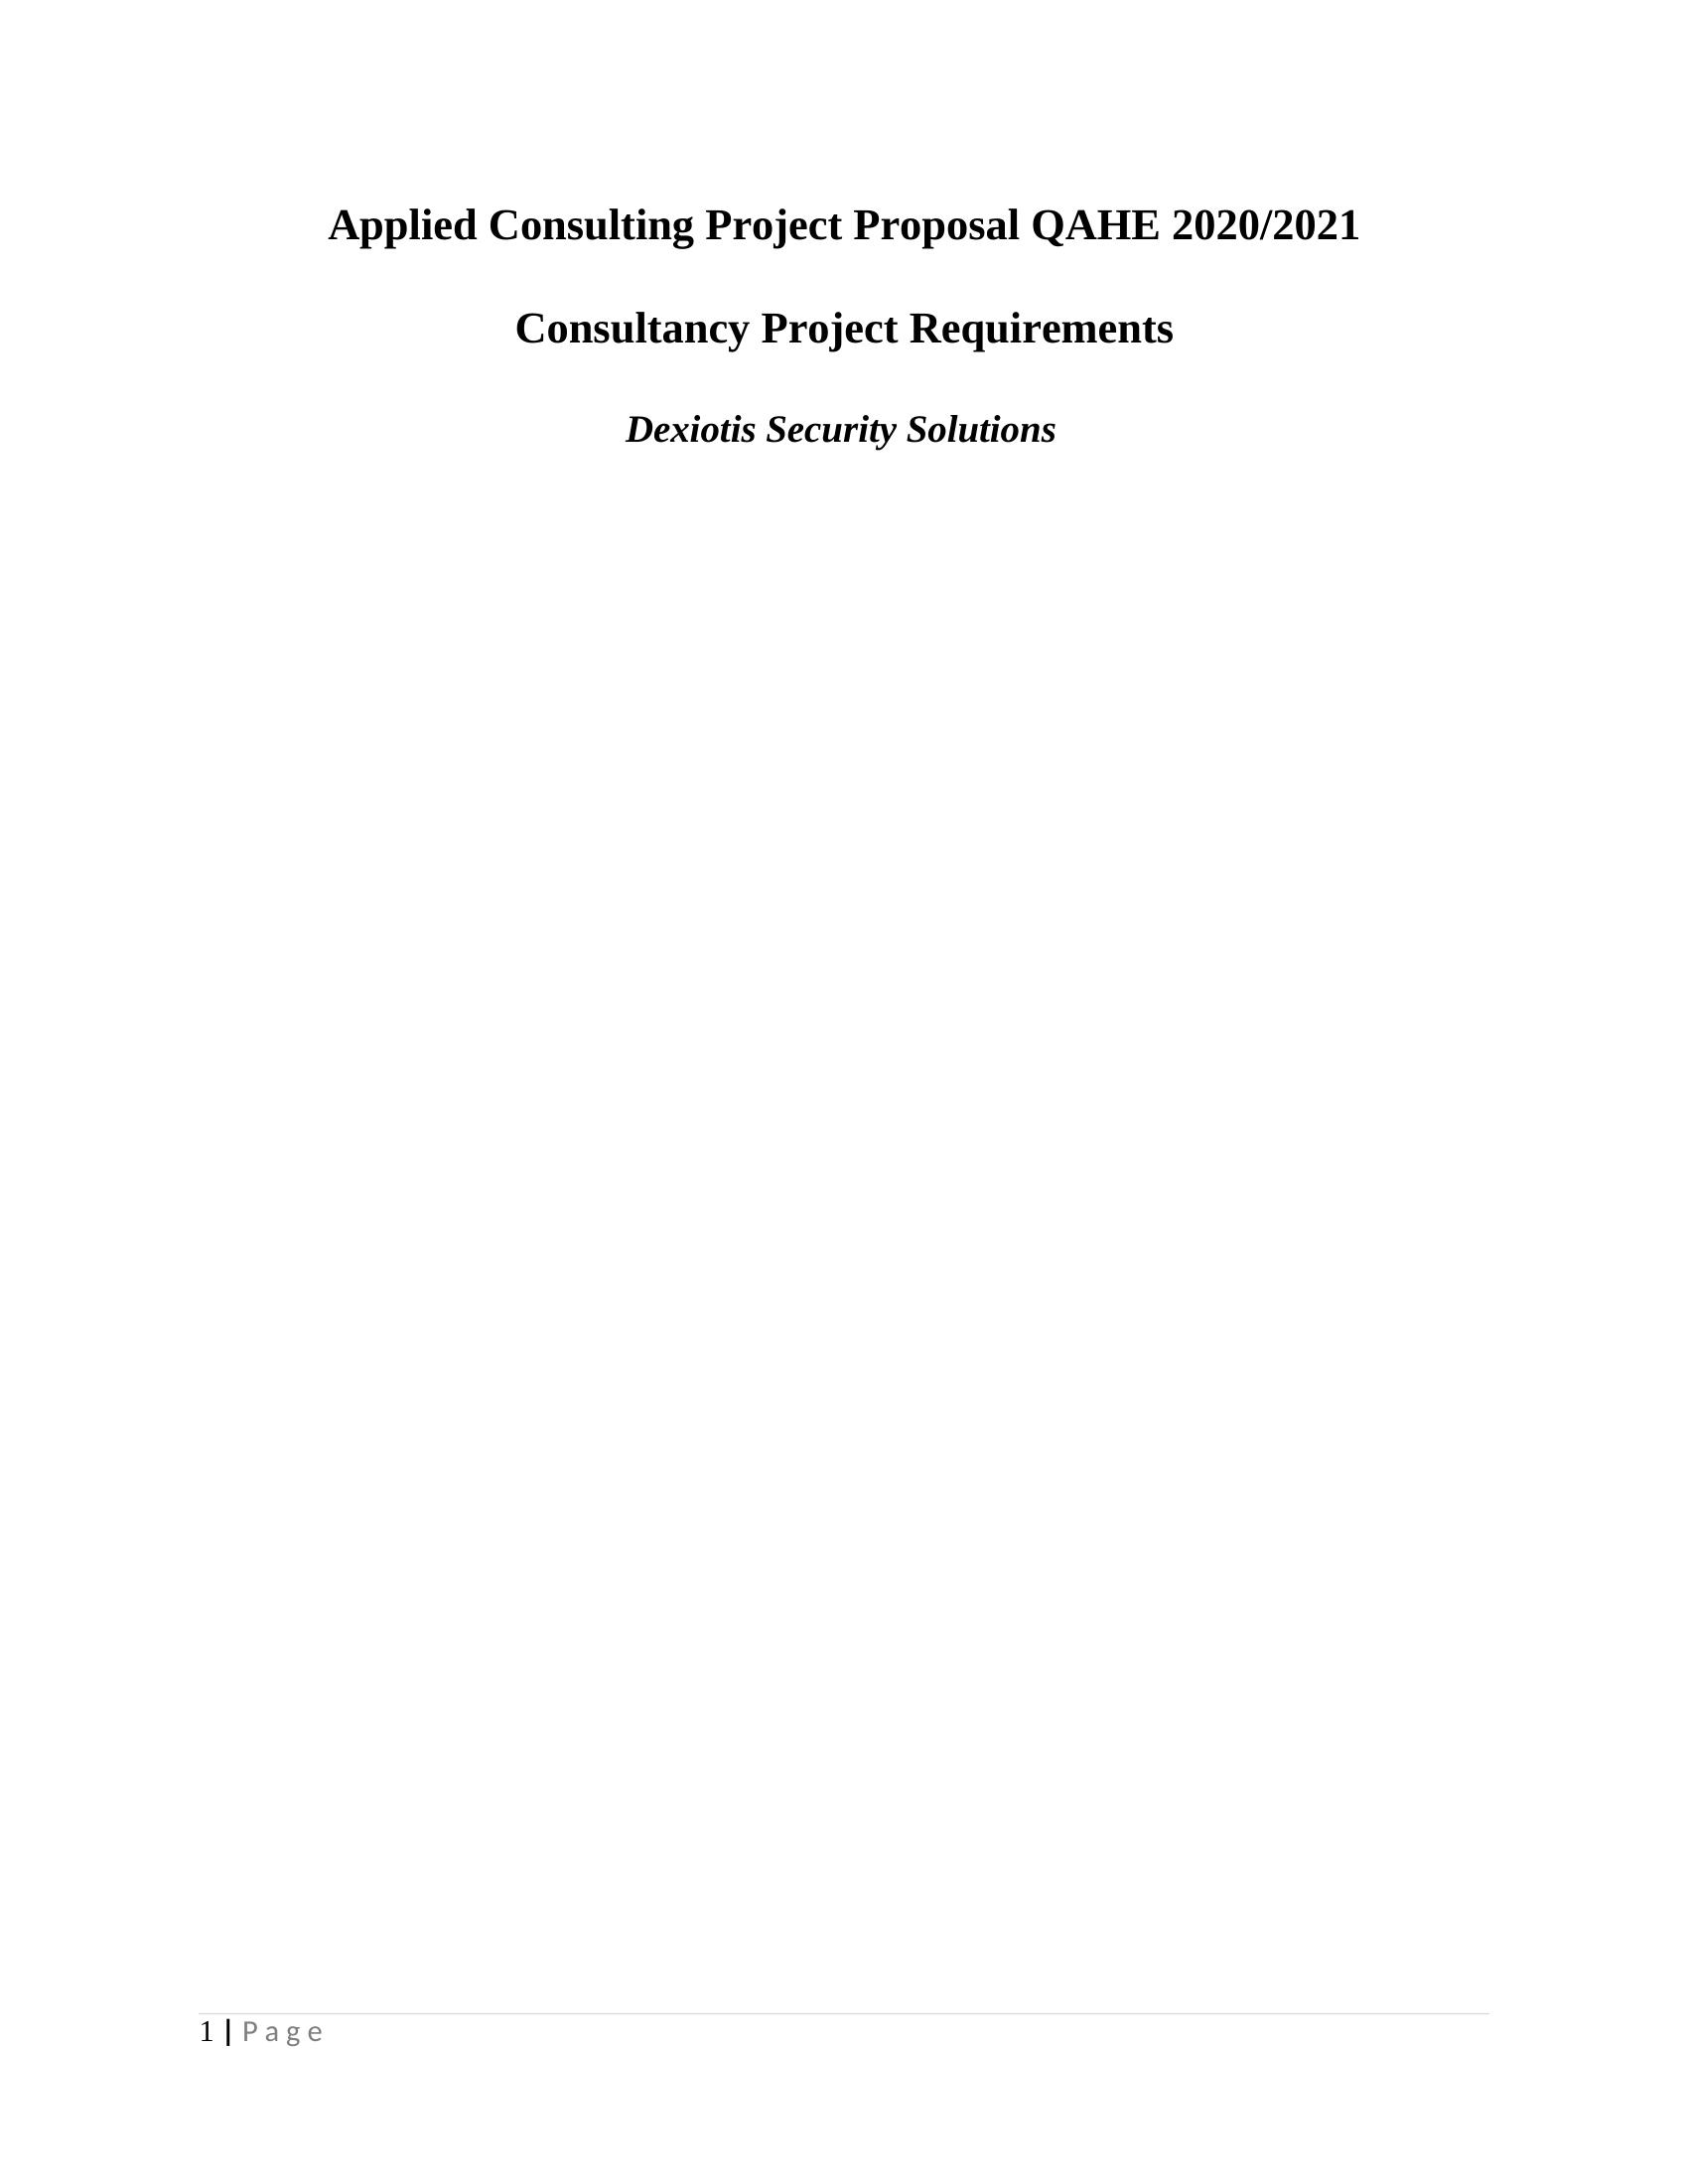 Applied Consulting Project Proposal QAHE  _Consultancy Project Requirements